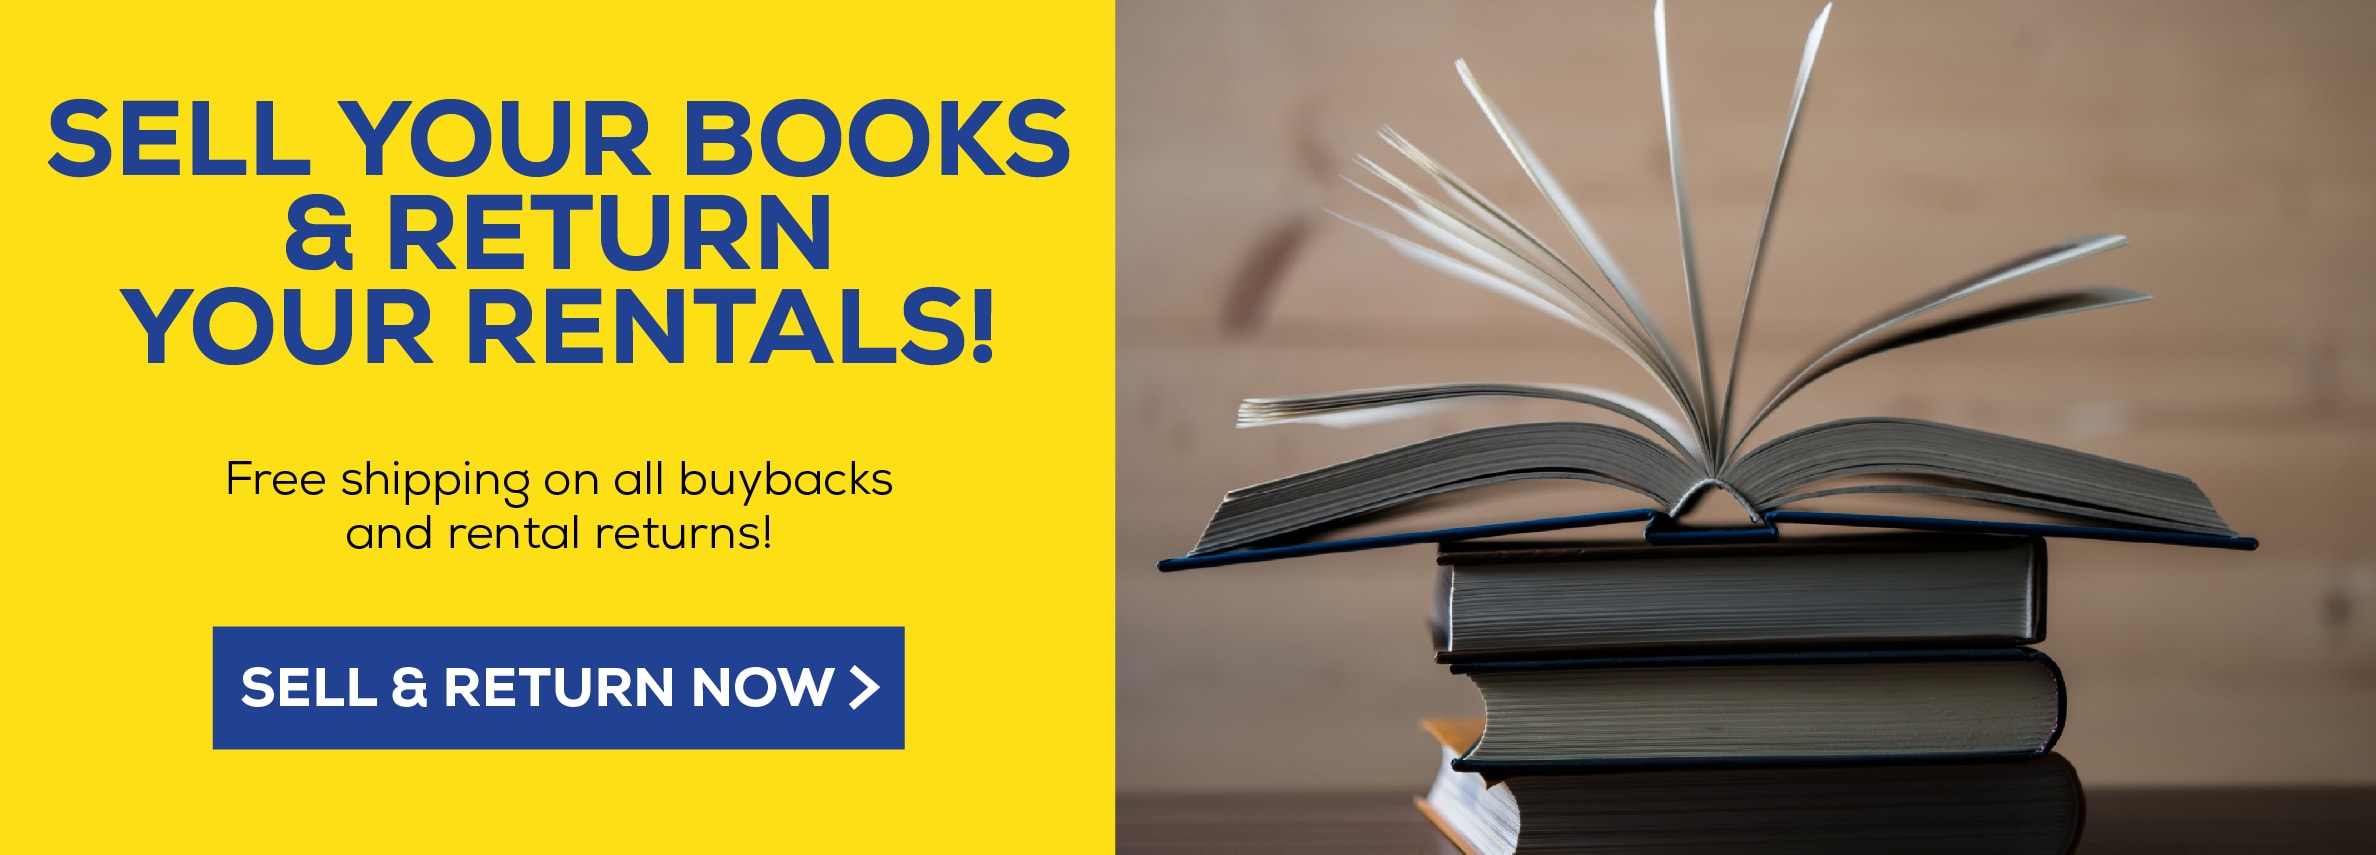 Sell your books and return your rentals! Free shipping on all buybacks and rental returns! Sell and return now